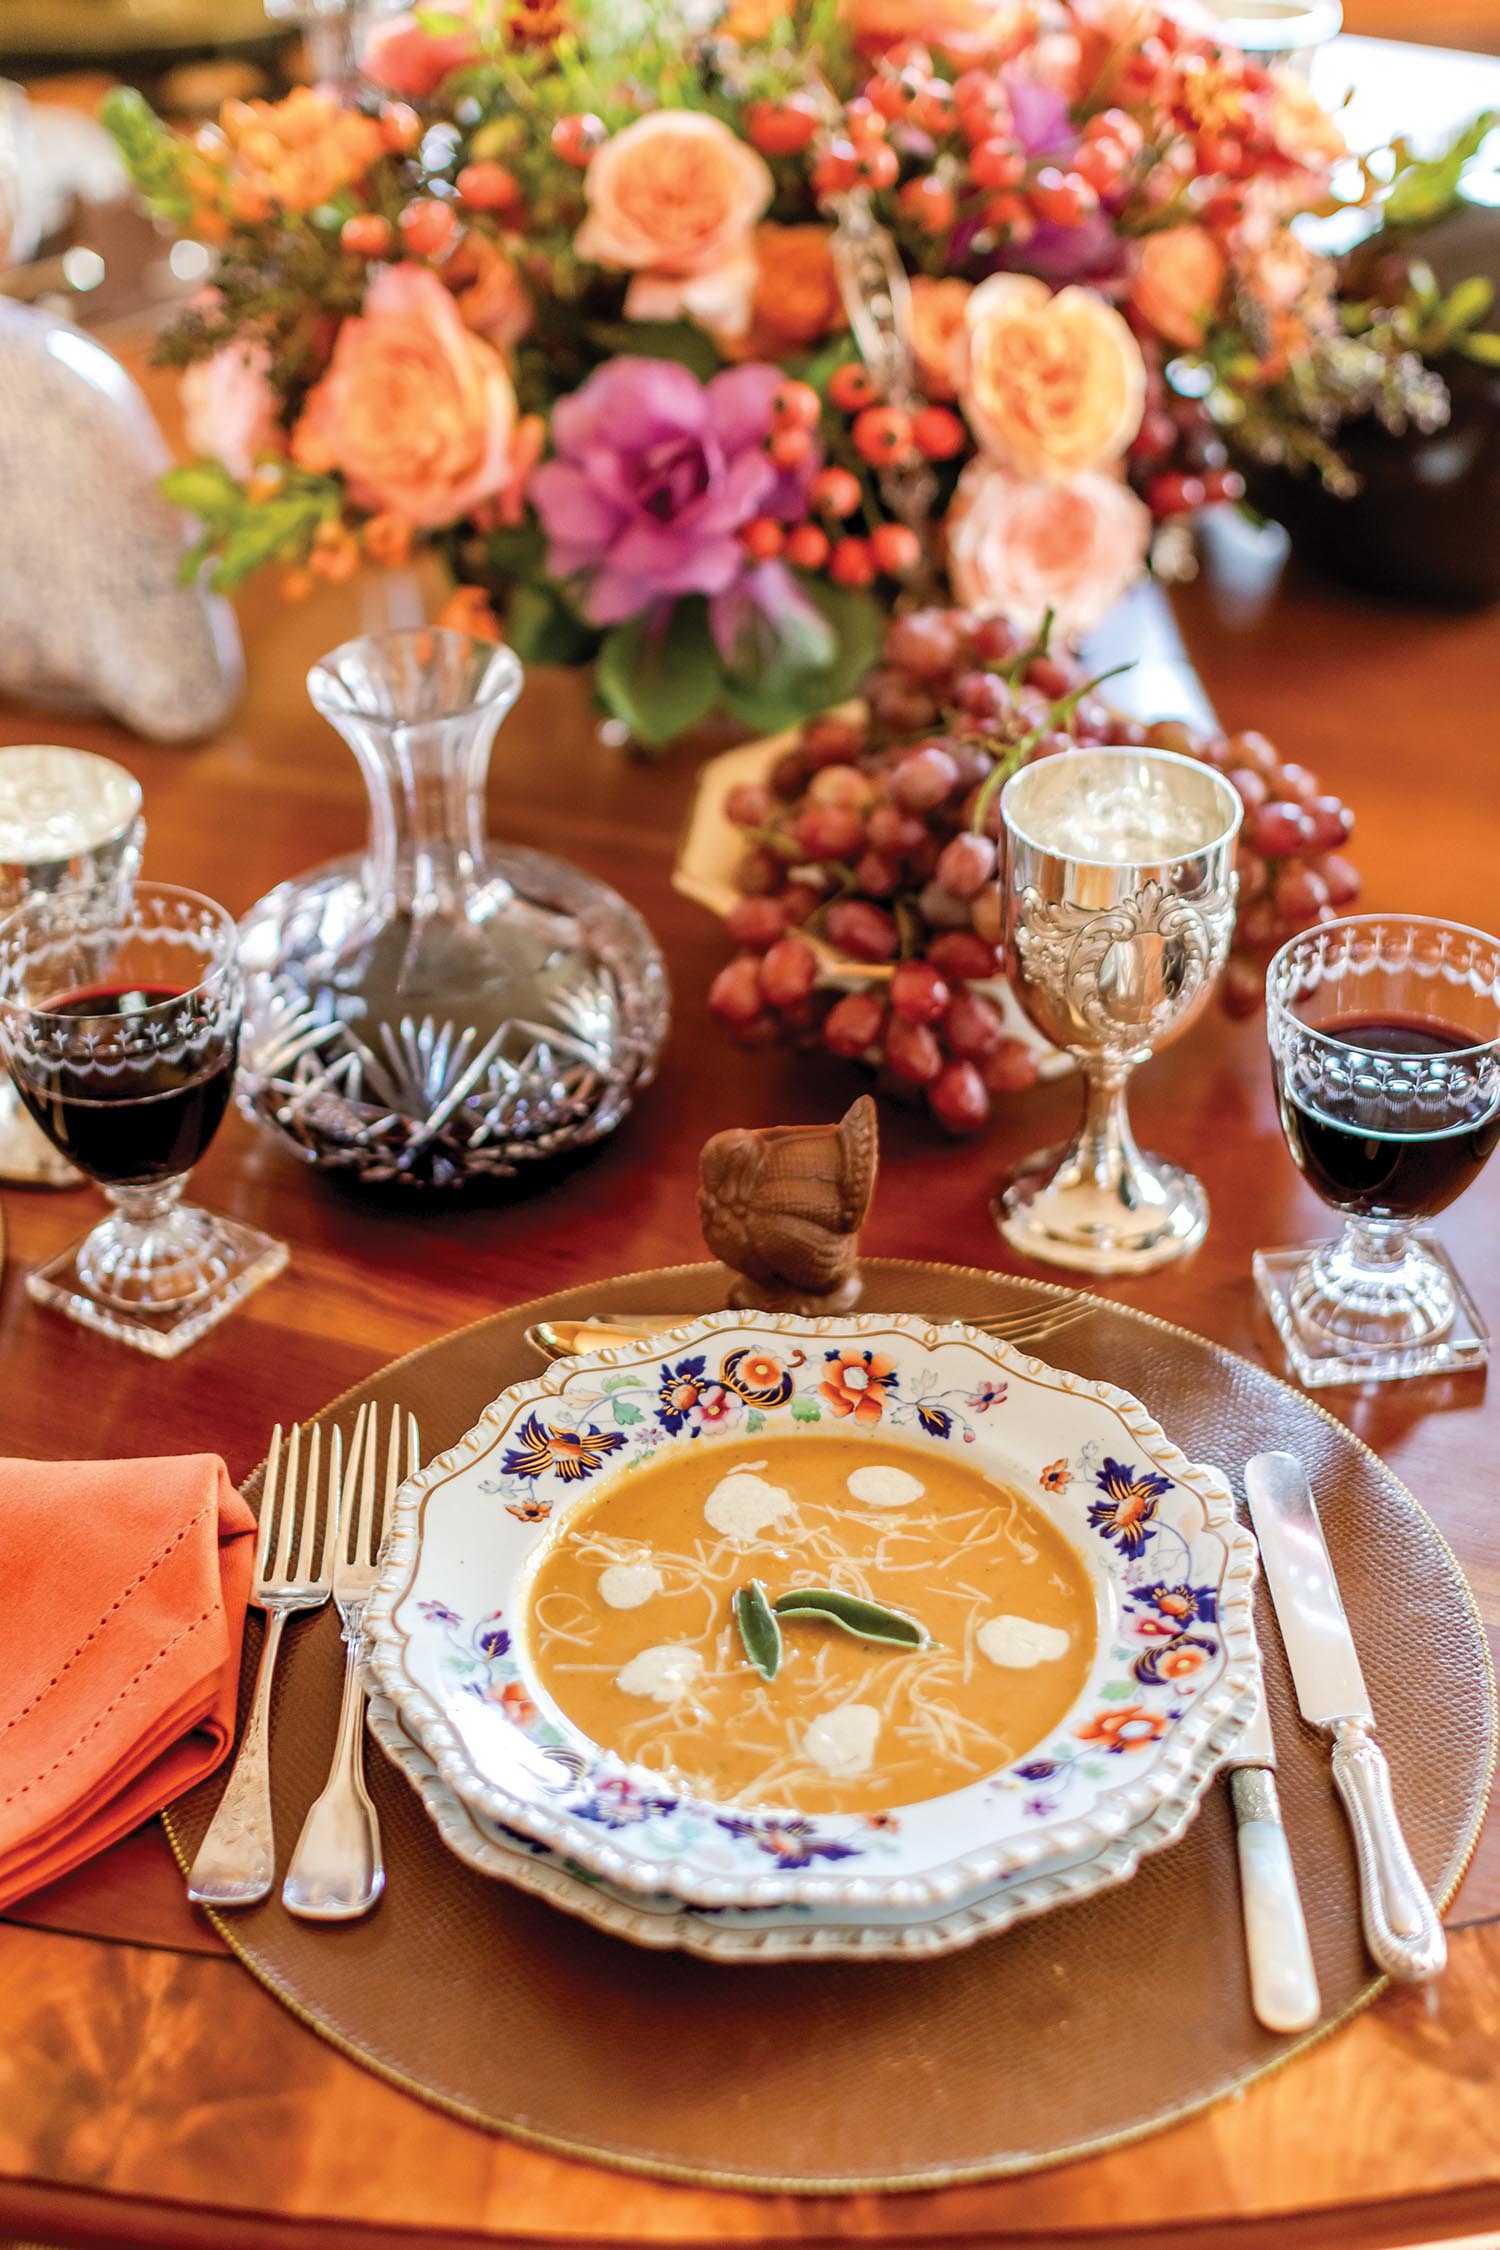 A bright gold soup sits in a painted floral bowl on a wooden table with orange and pink flowers.